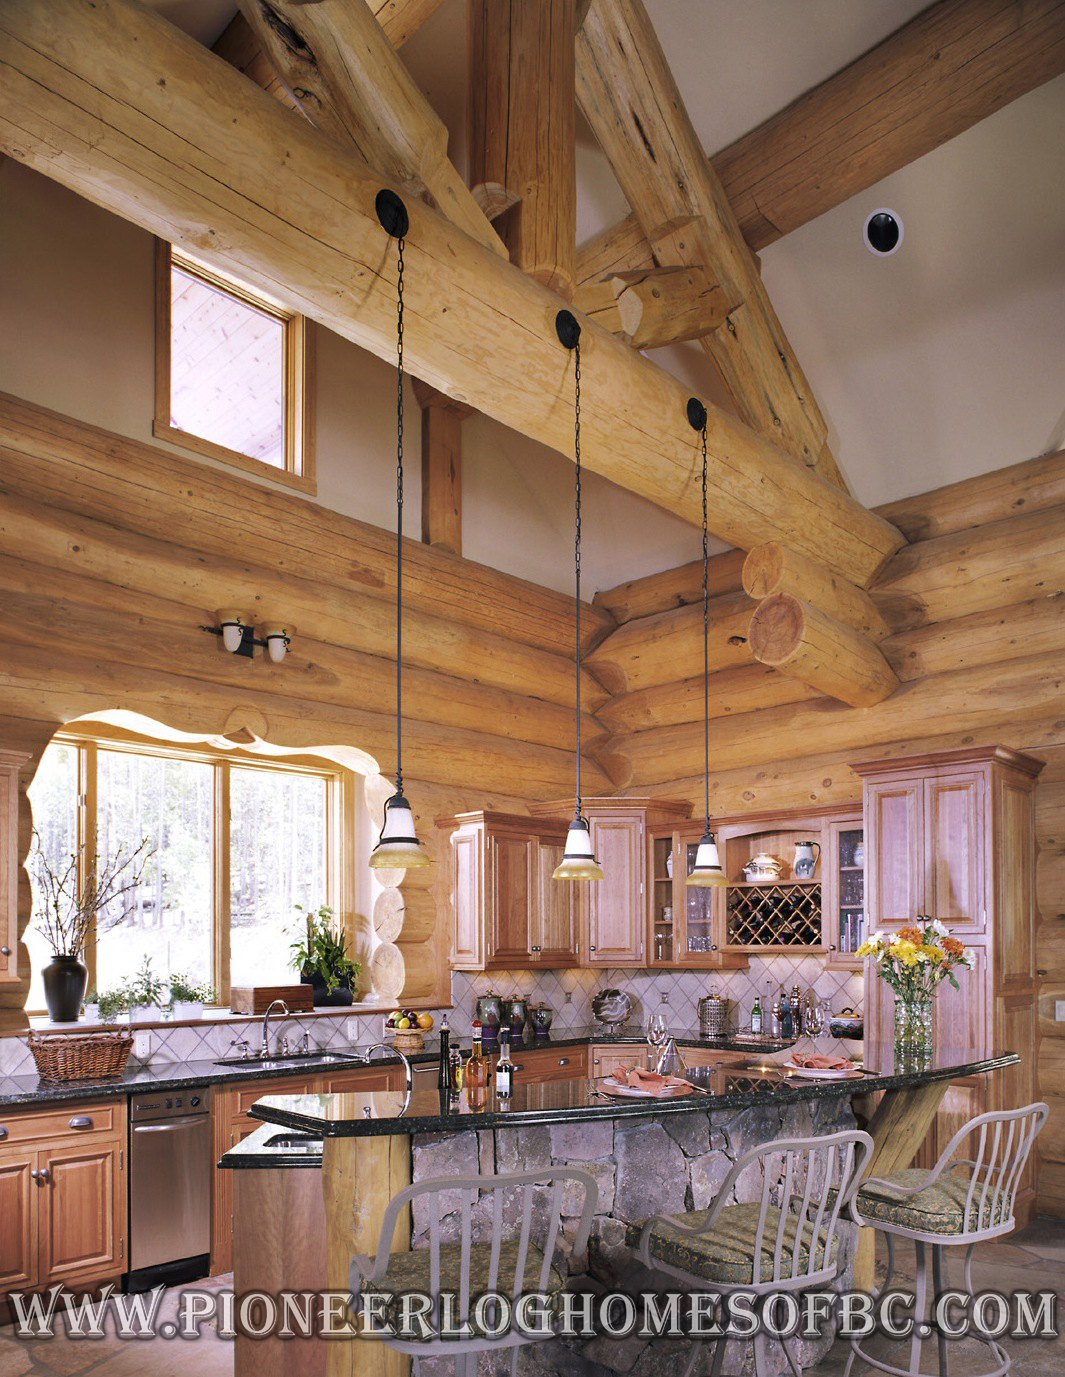 Log Homes Kitchen & Dining Image Gallery | BC, Canada